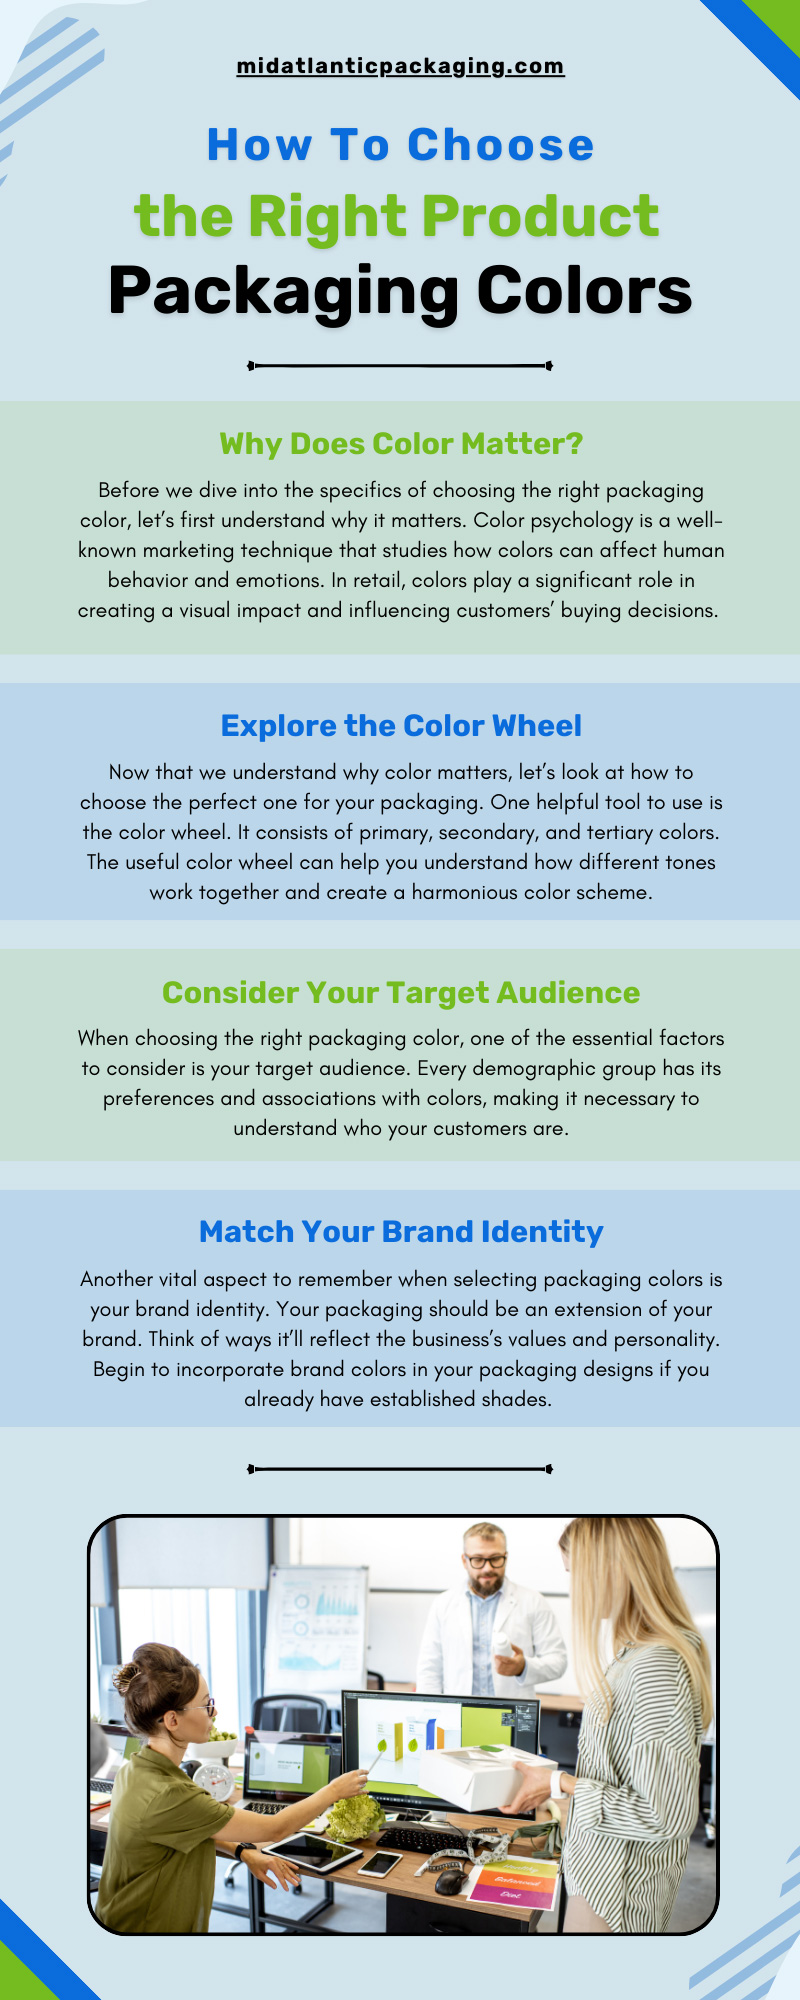 How To Choose the Right Product Packaging Colors